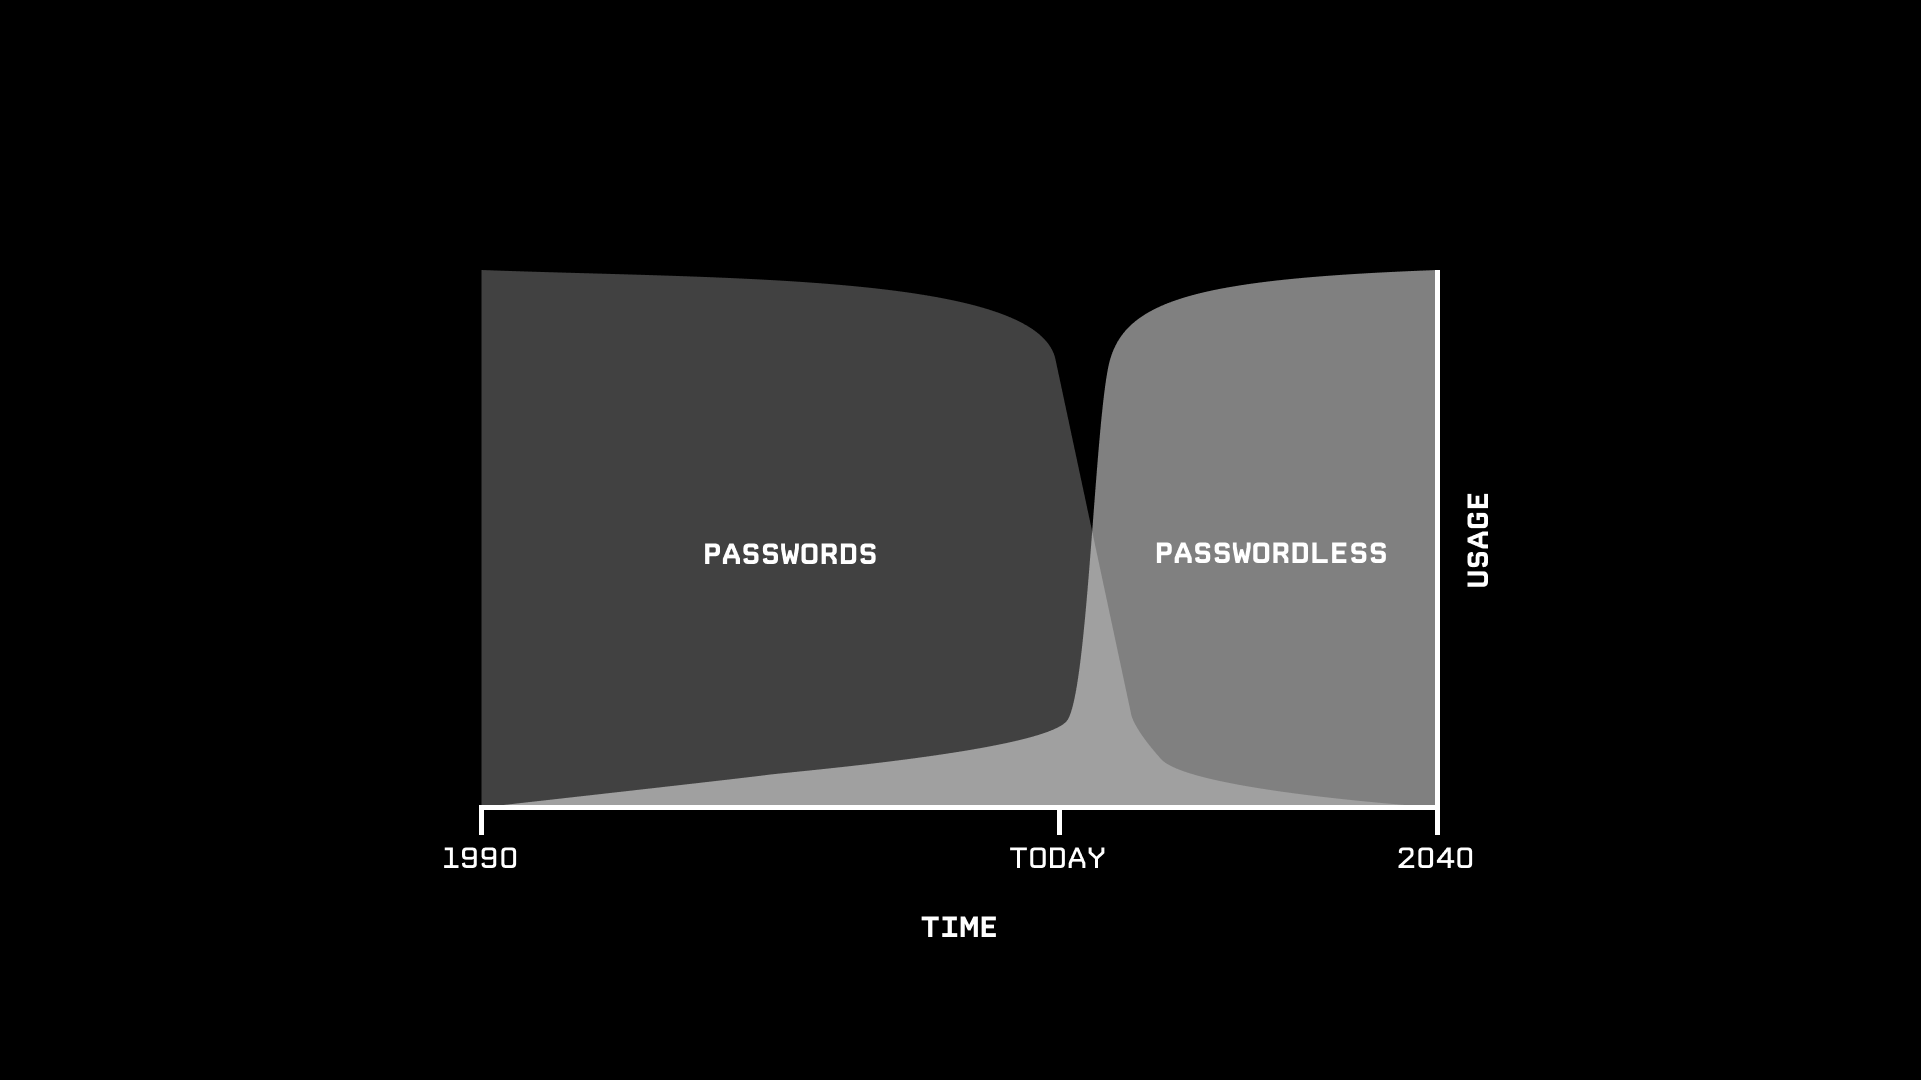 Perceived decline of passwords and adoption of passwordless.